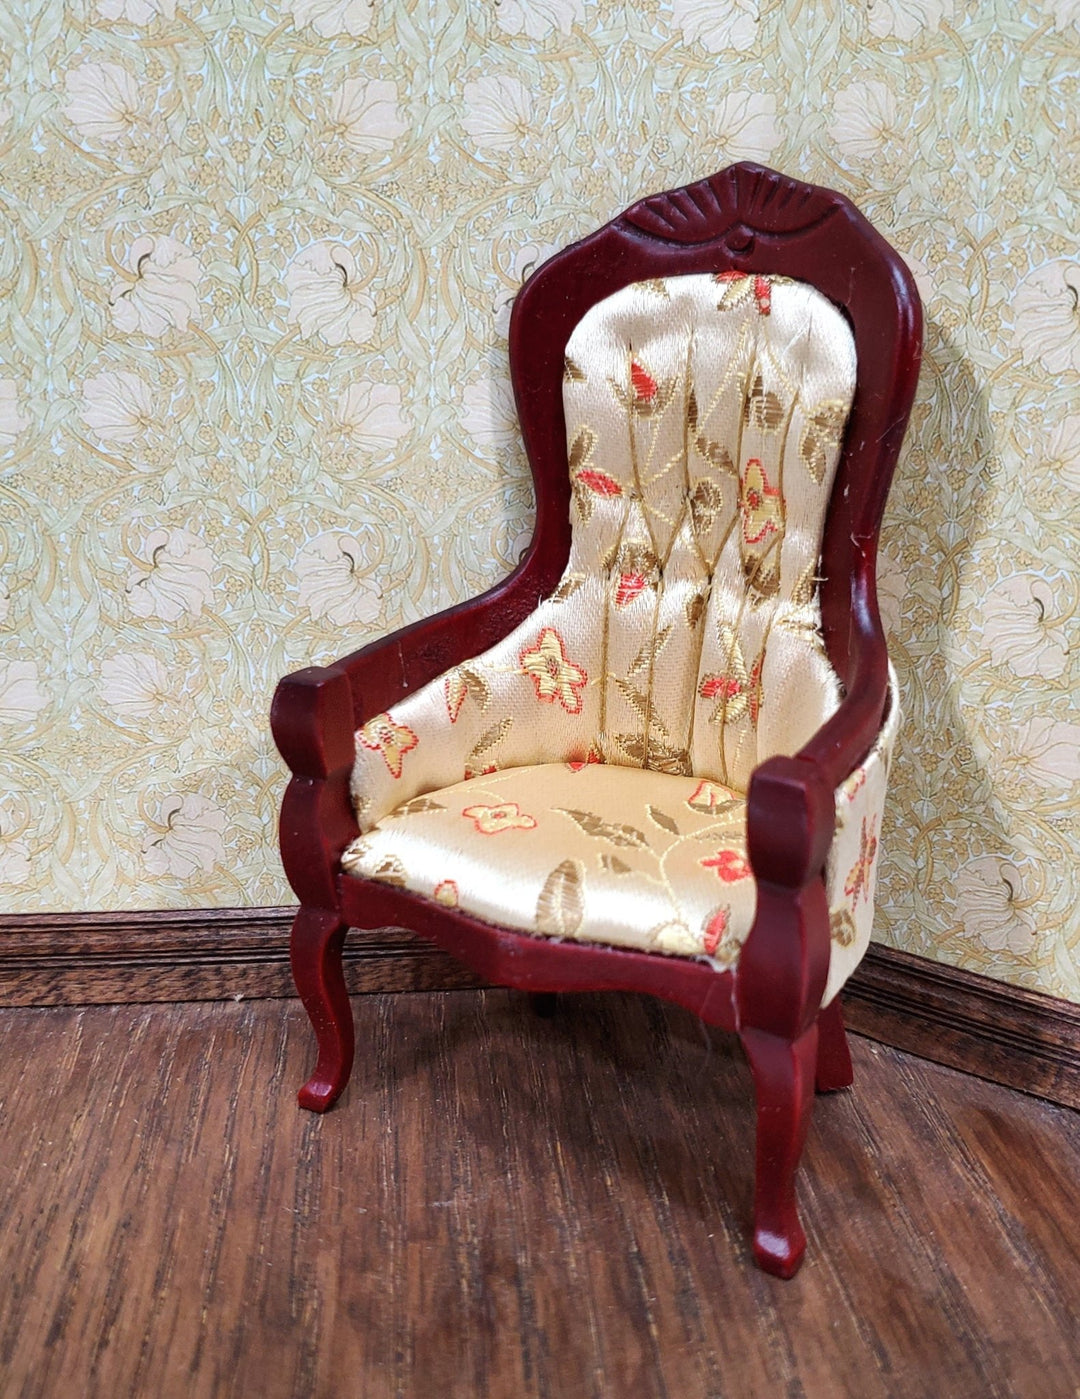 Dollhouse Chair Victorian Style Gold Floral Print 1:12 Scale Miniature Mahogany Finish - Miniature Crush